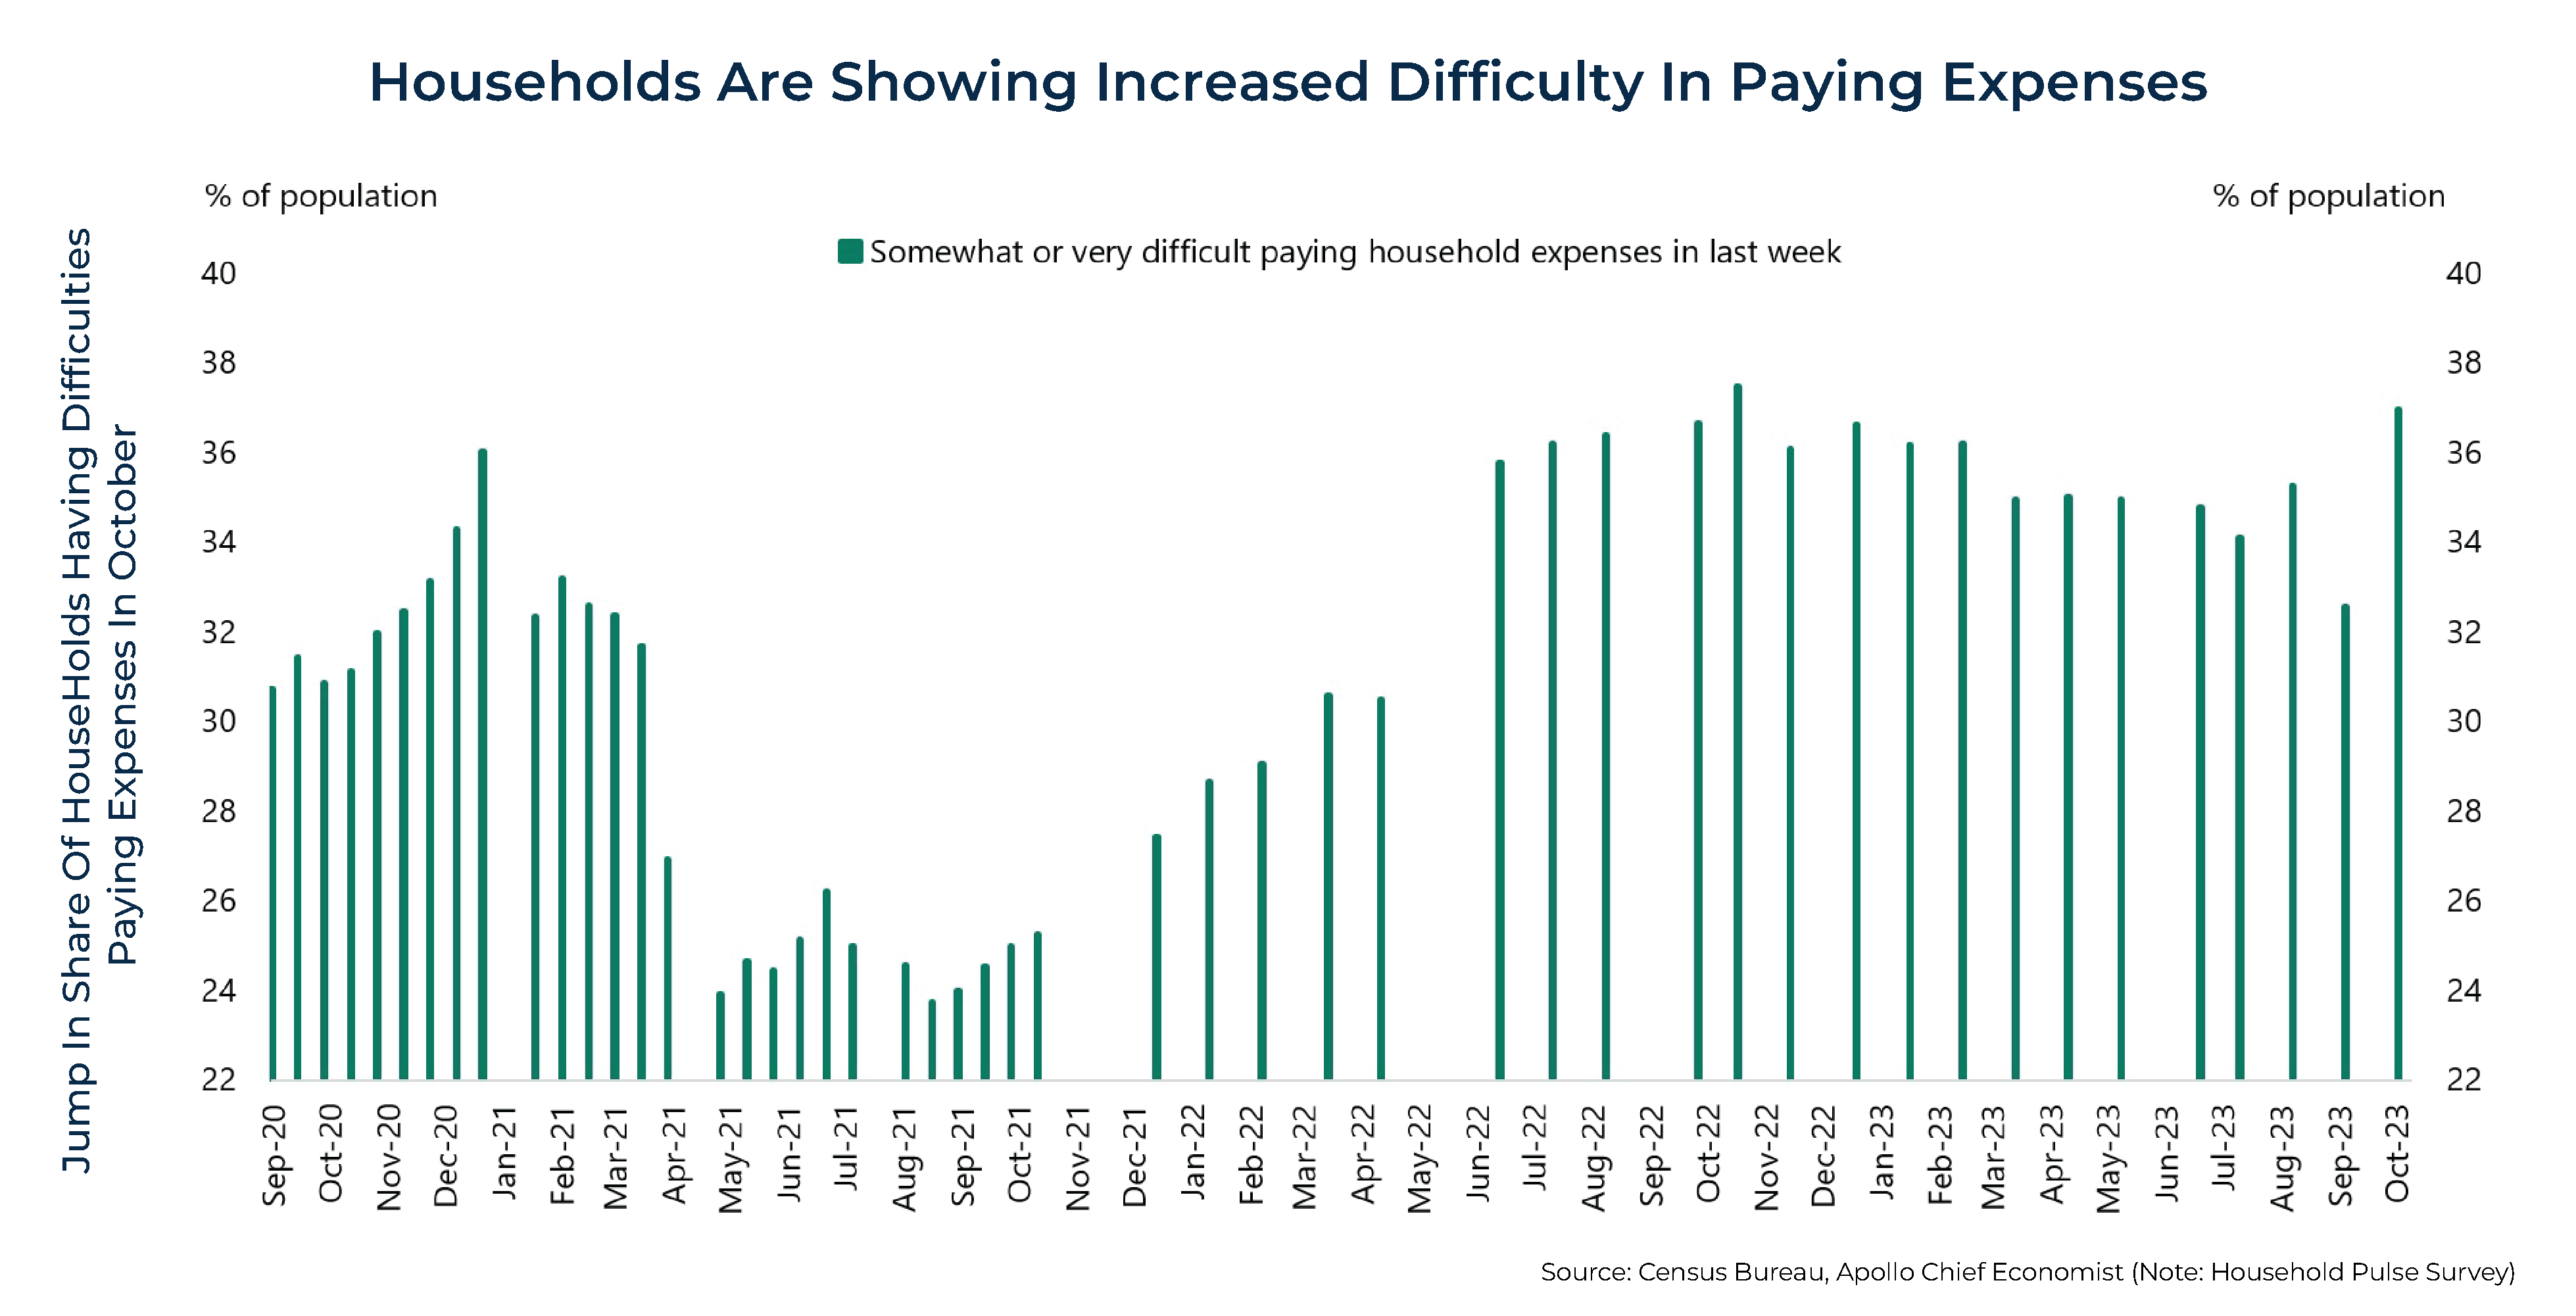 Households are showing increased difficulty in paying expenses